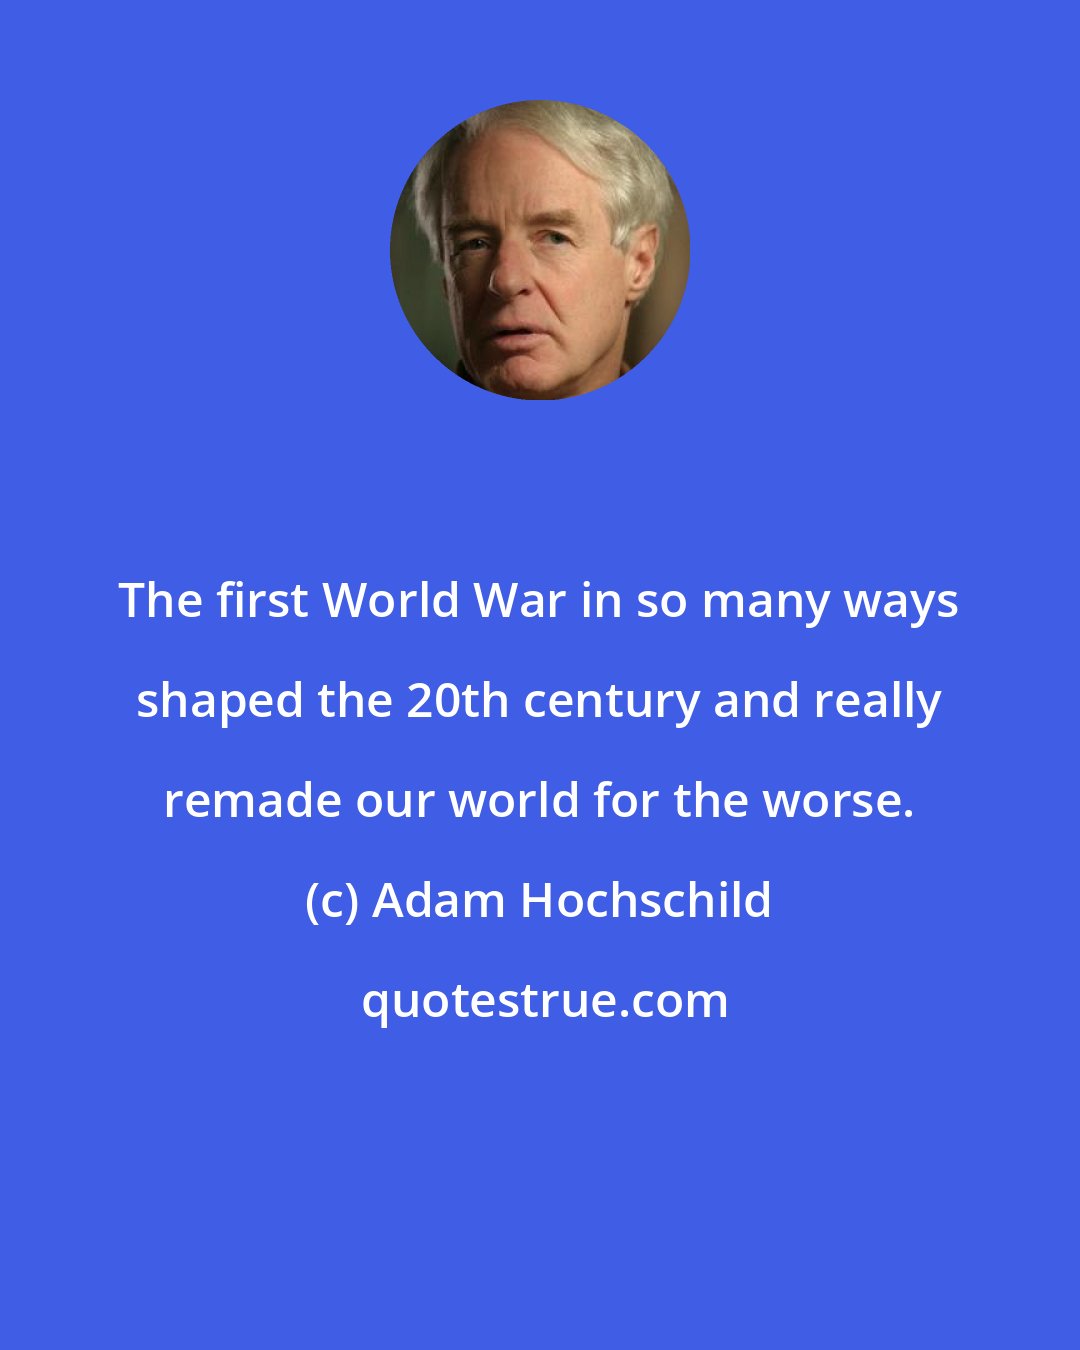 Adam Hochschild: The first World War in so many ways shaped the 20th century and really remade our world for the worse.